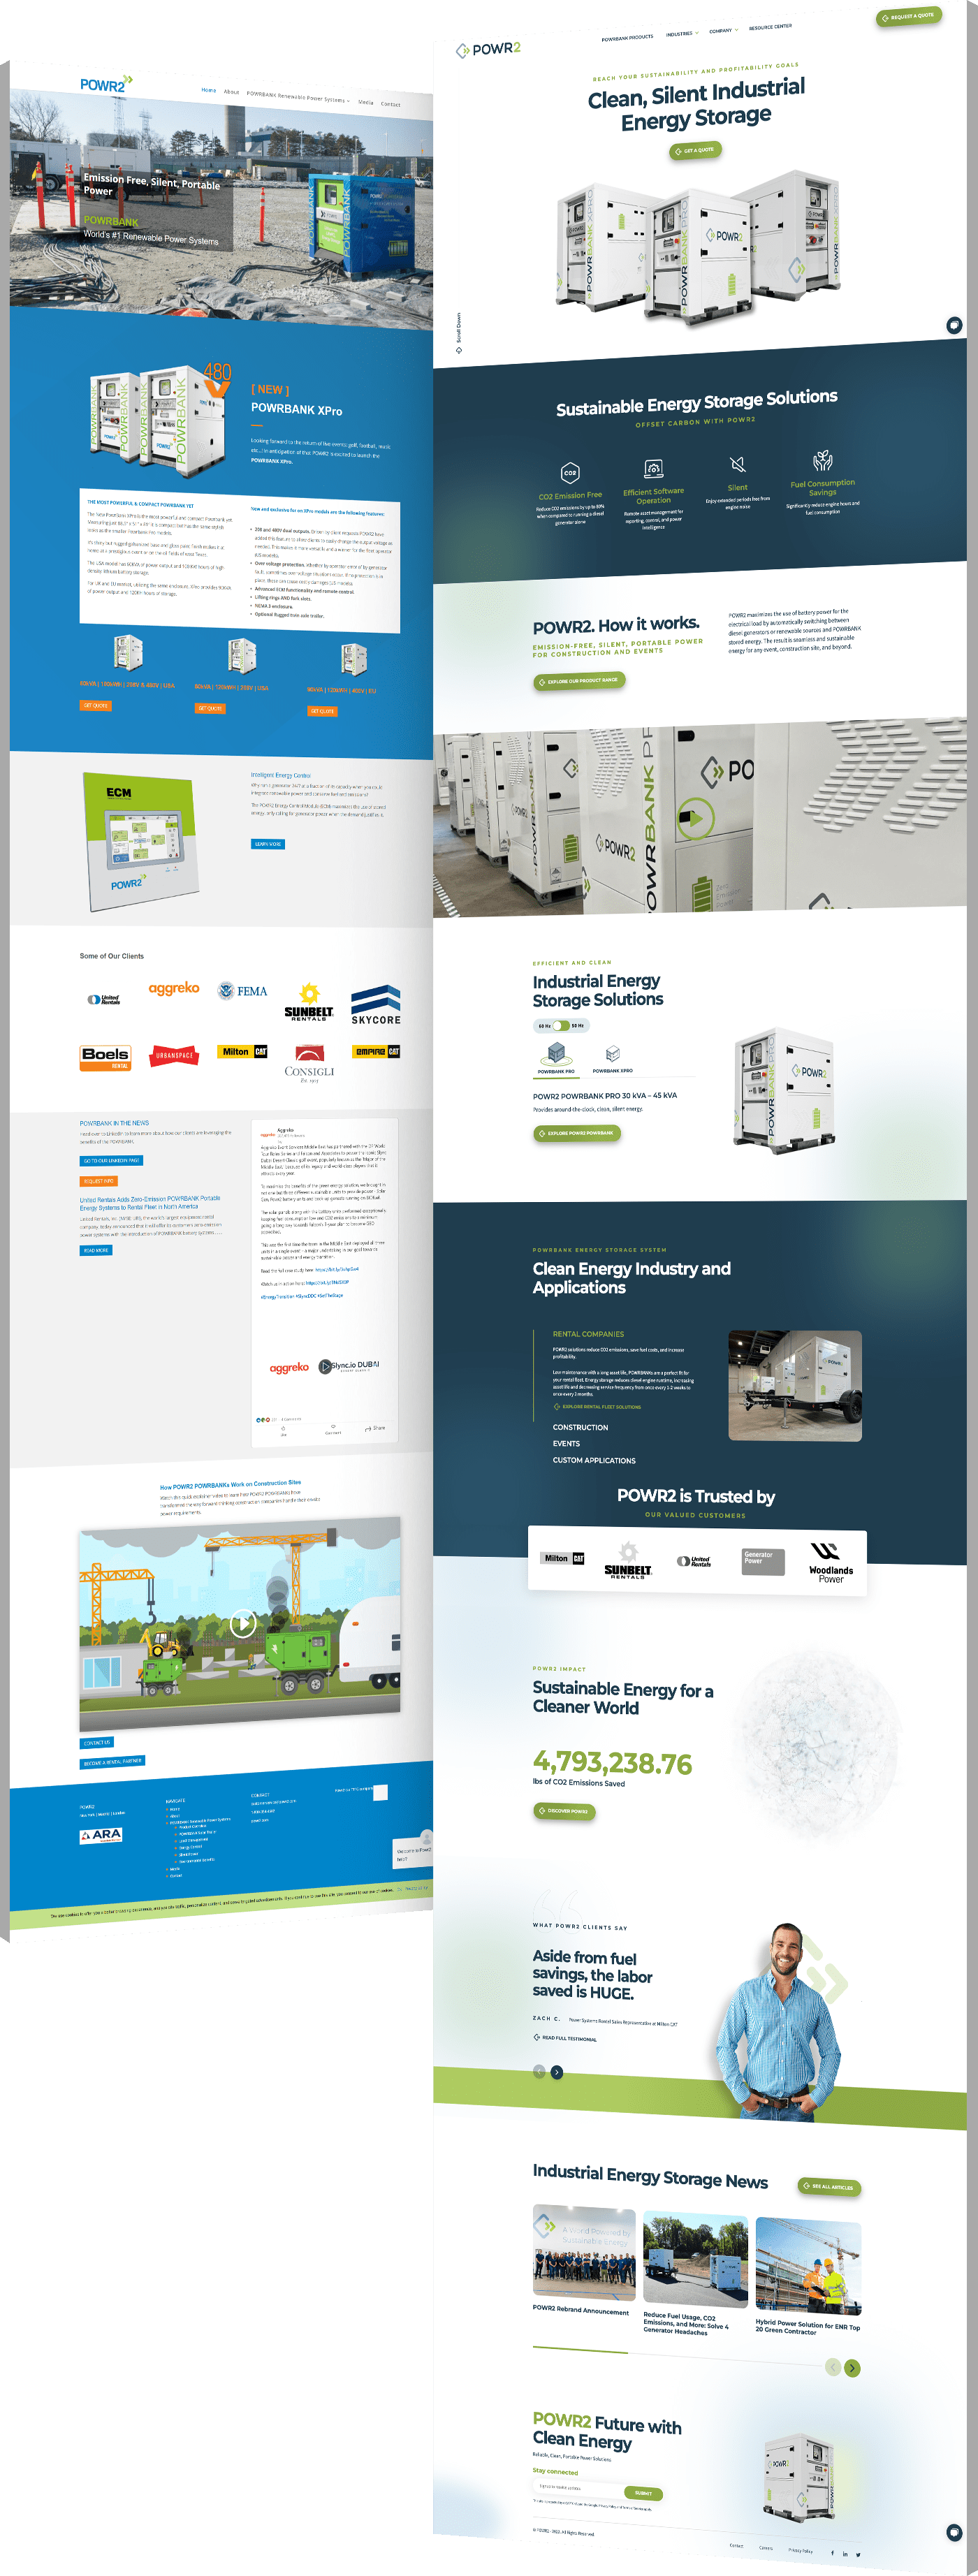 Powr2 website design comparison - before and after redesign